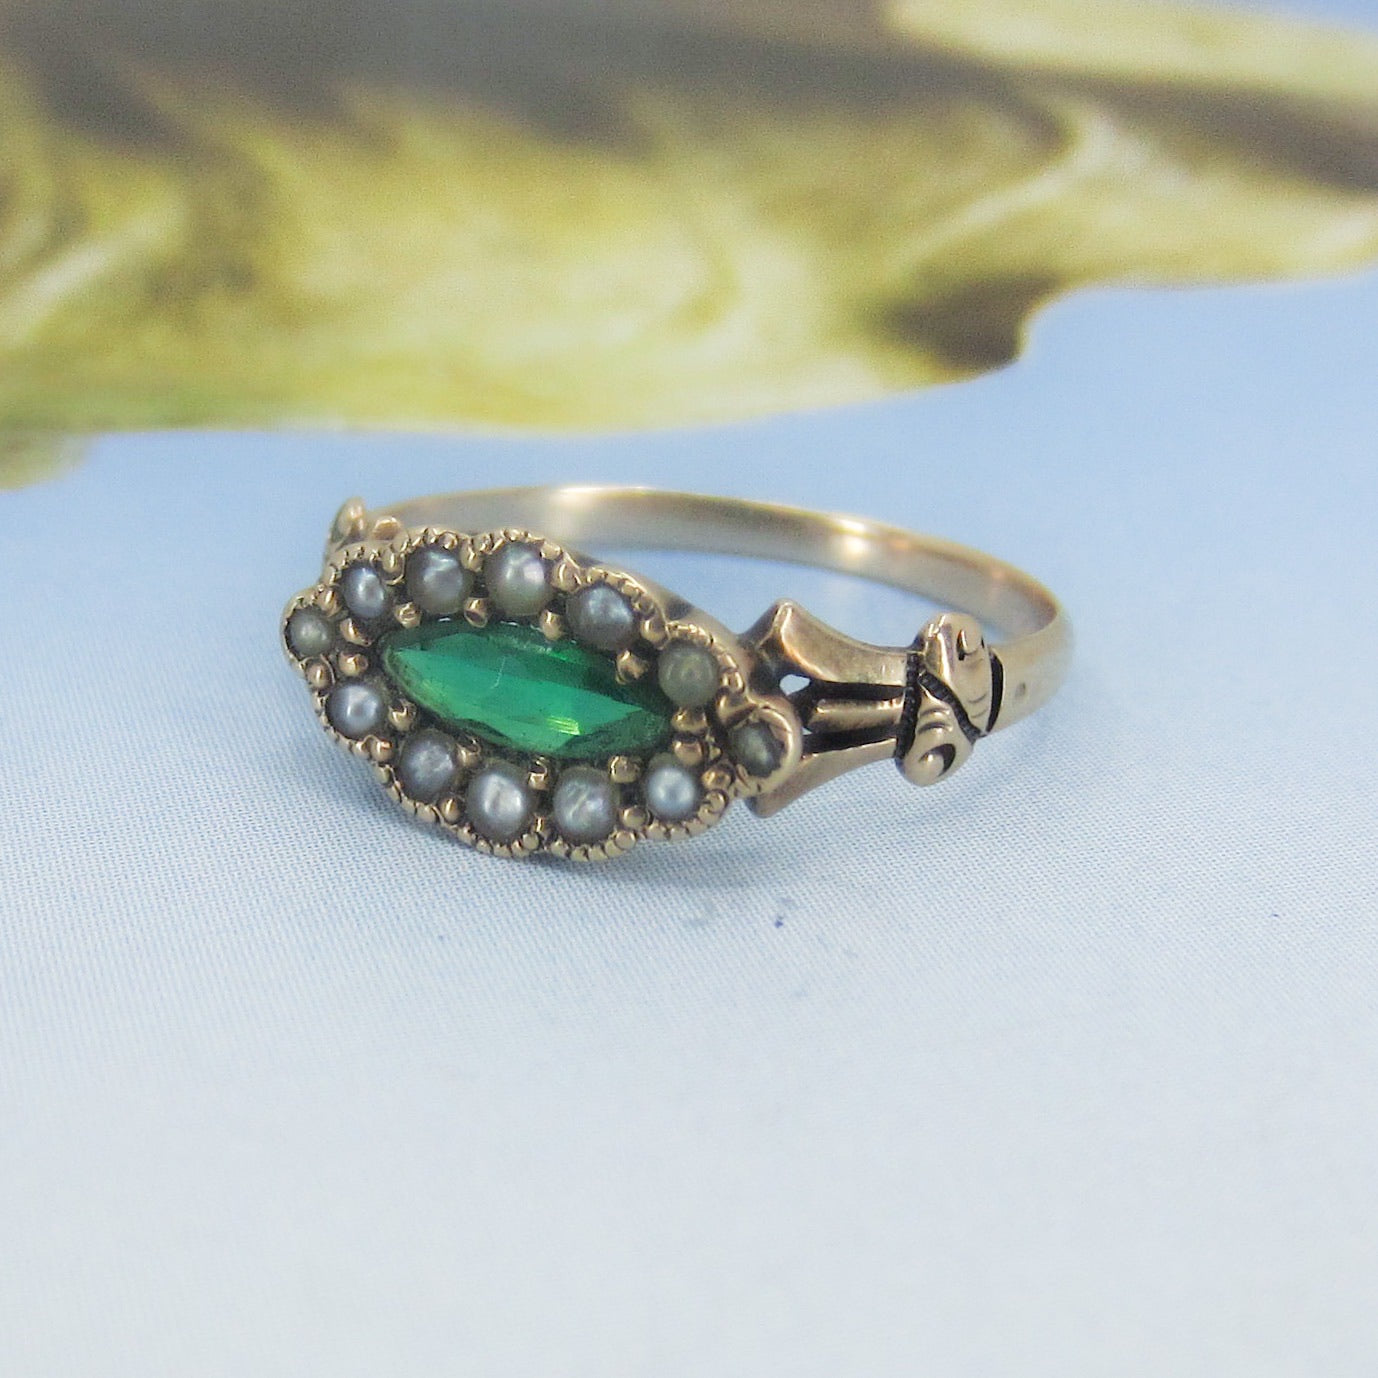 SOLD Victorian Green Glass and Seed Pearl Ring 14k c. 1880